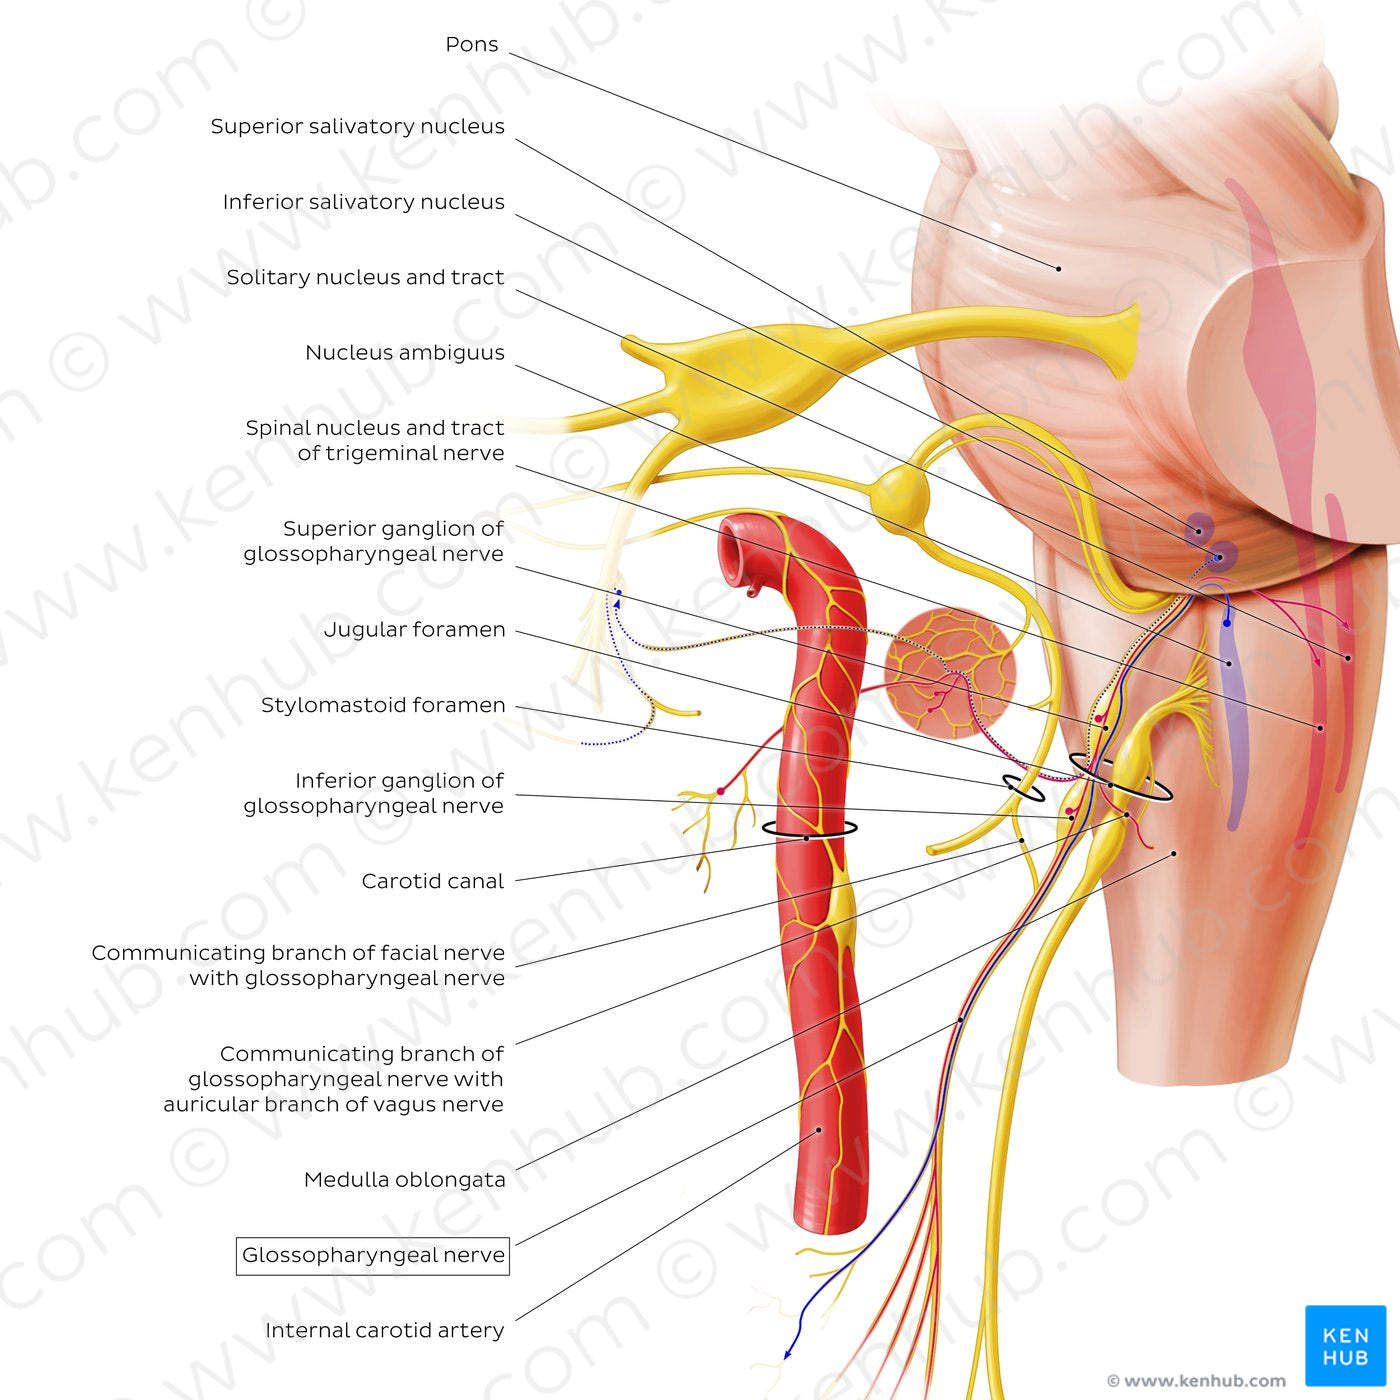 Glossopharyngeal nerve (origin and proximal branches) (English)